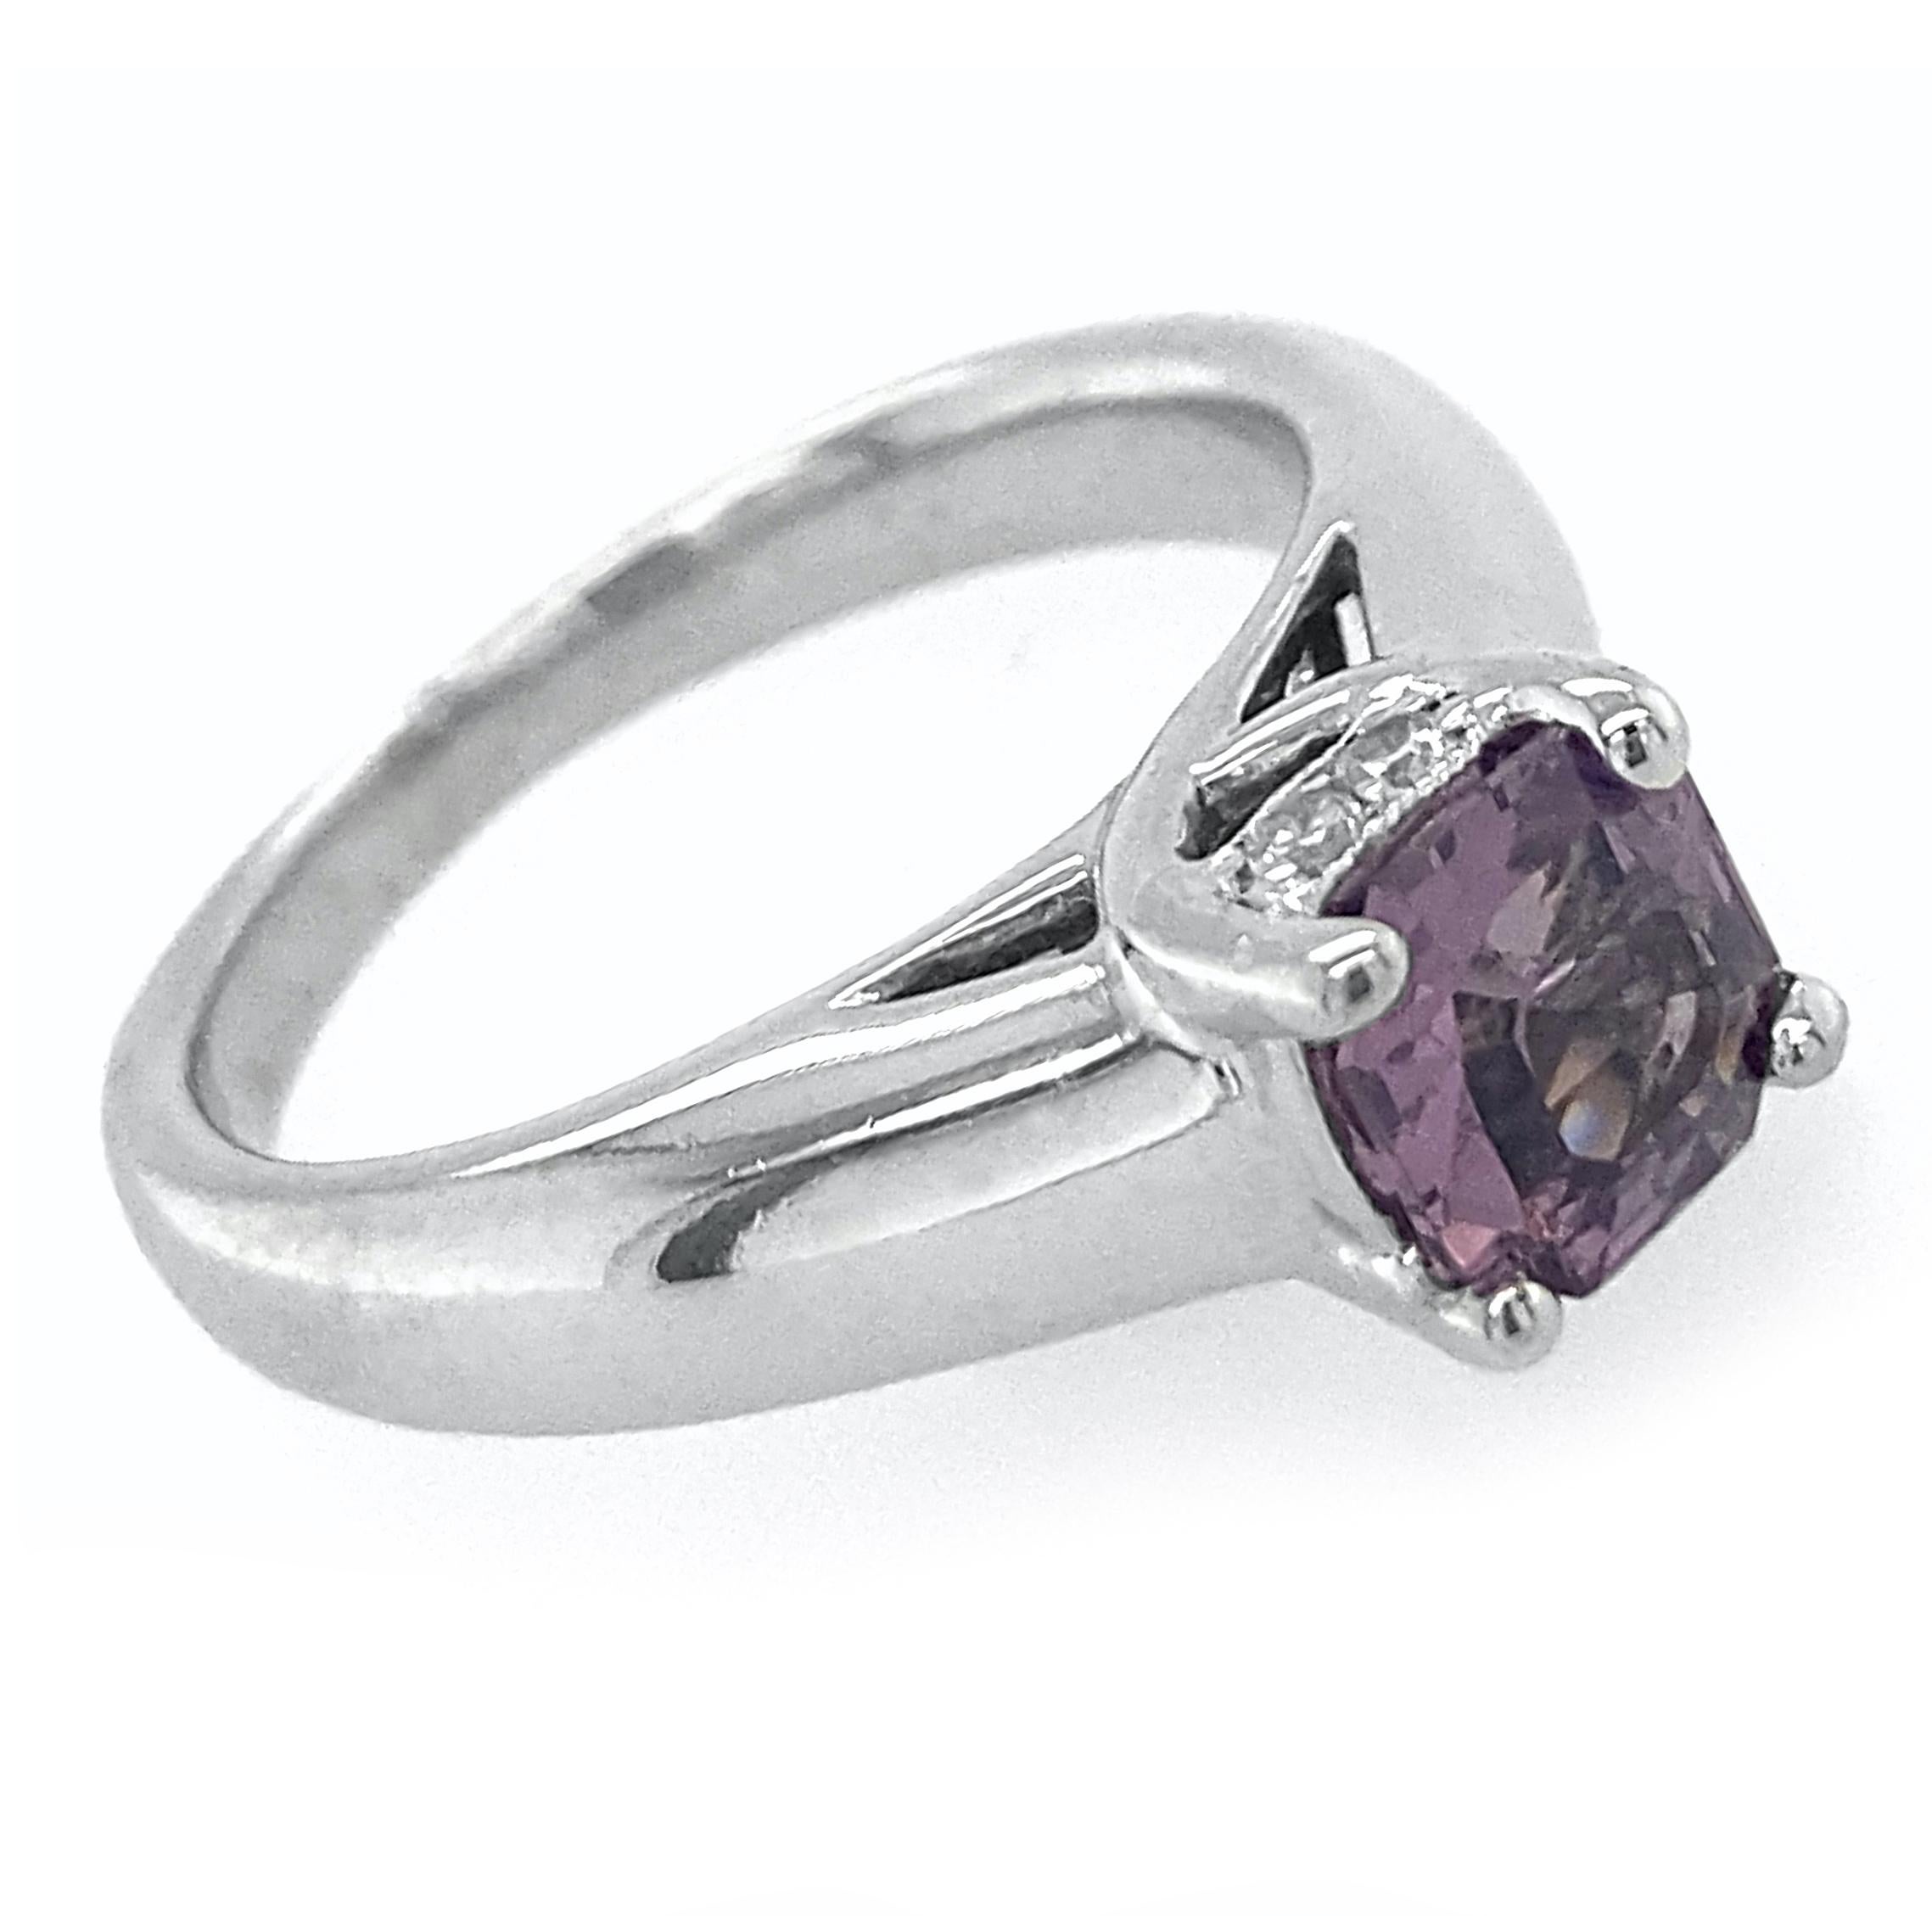 Contemporary Mauve Spinel Set in Circa 2000 White Gold Solitaire with Diamond Accents